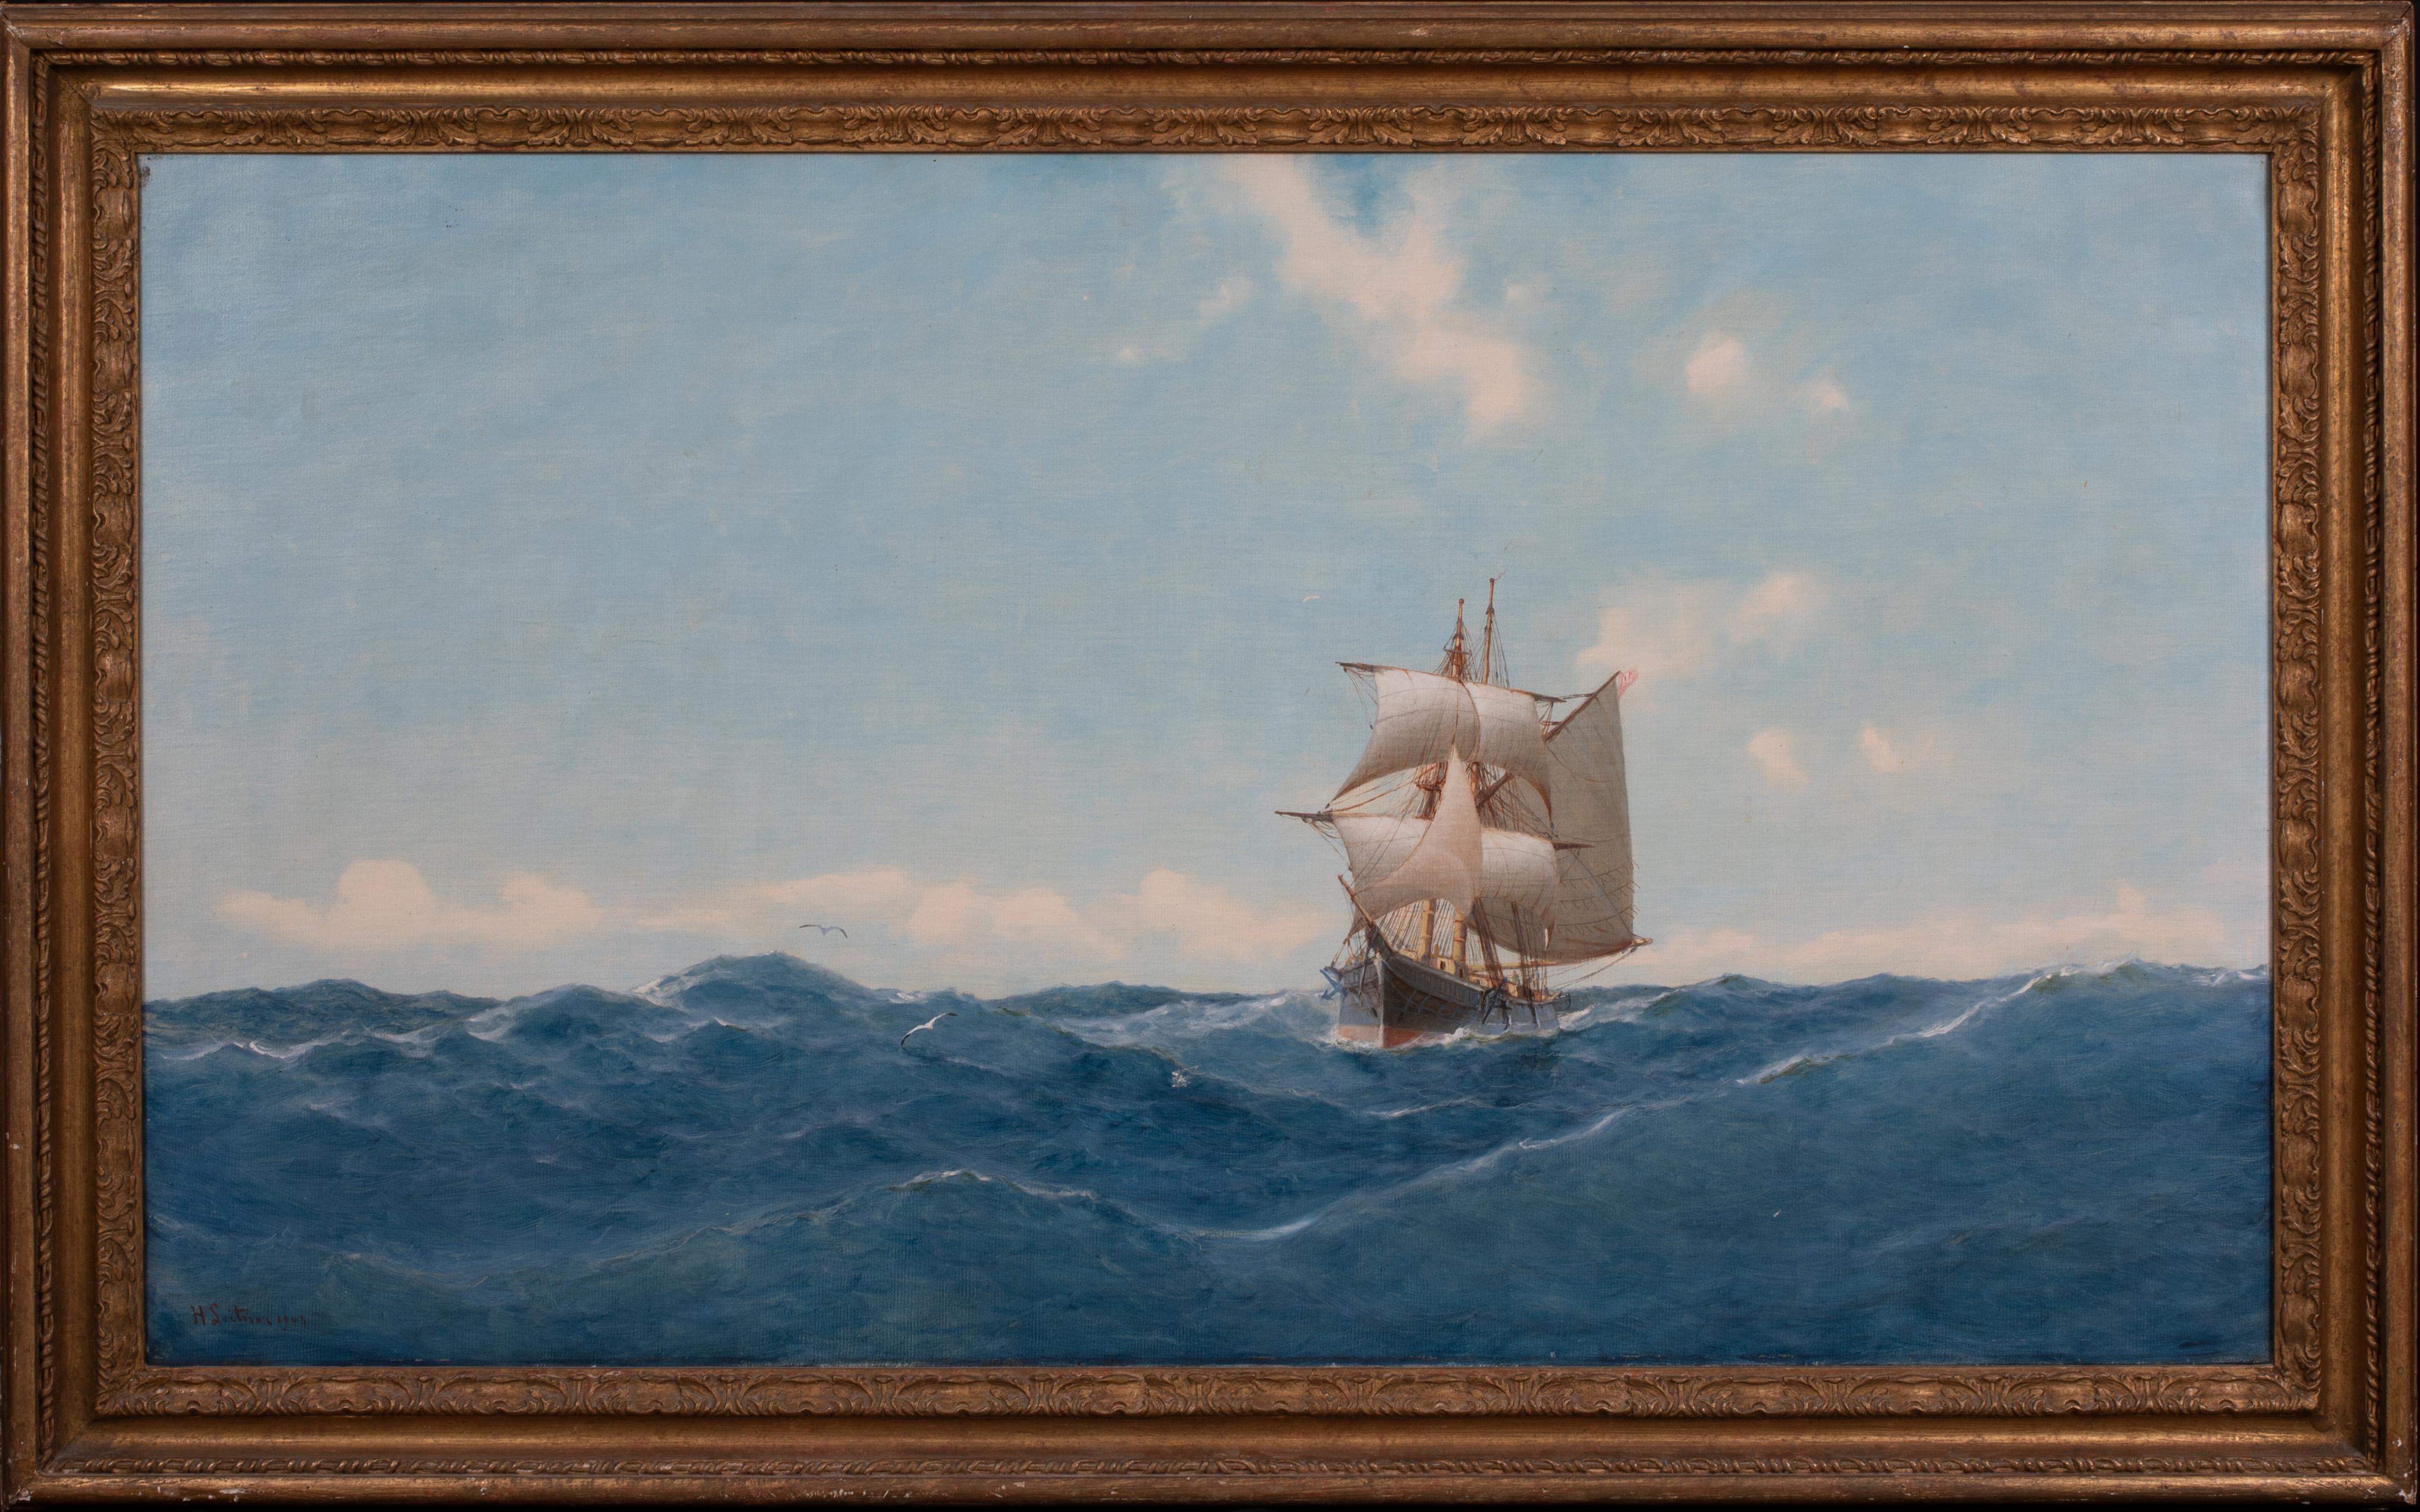 Fishing Ship Sailing In Open Water, 19th Century  - Painting by Unknown